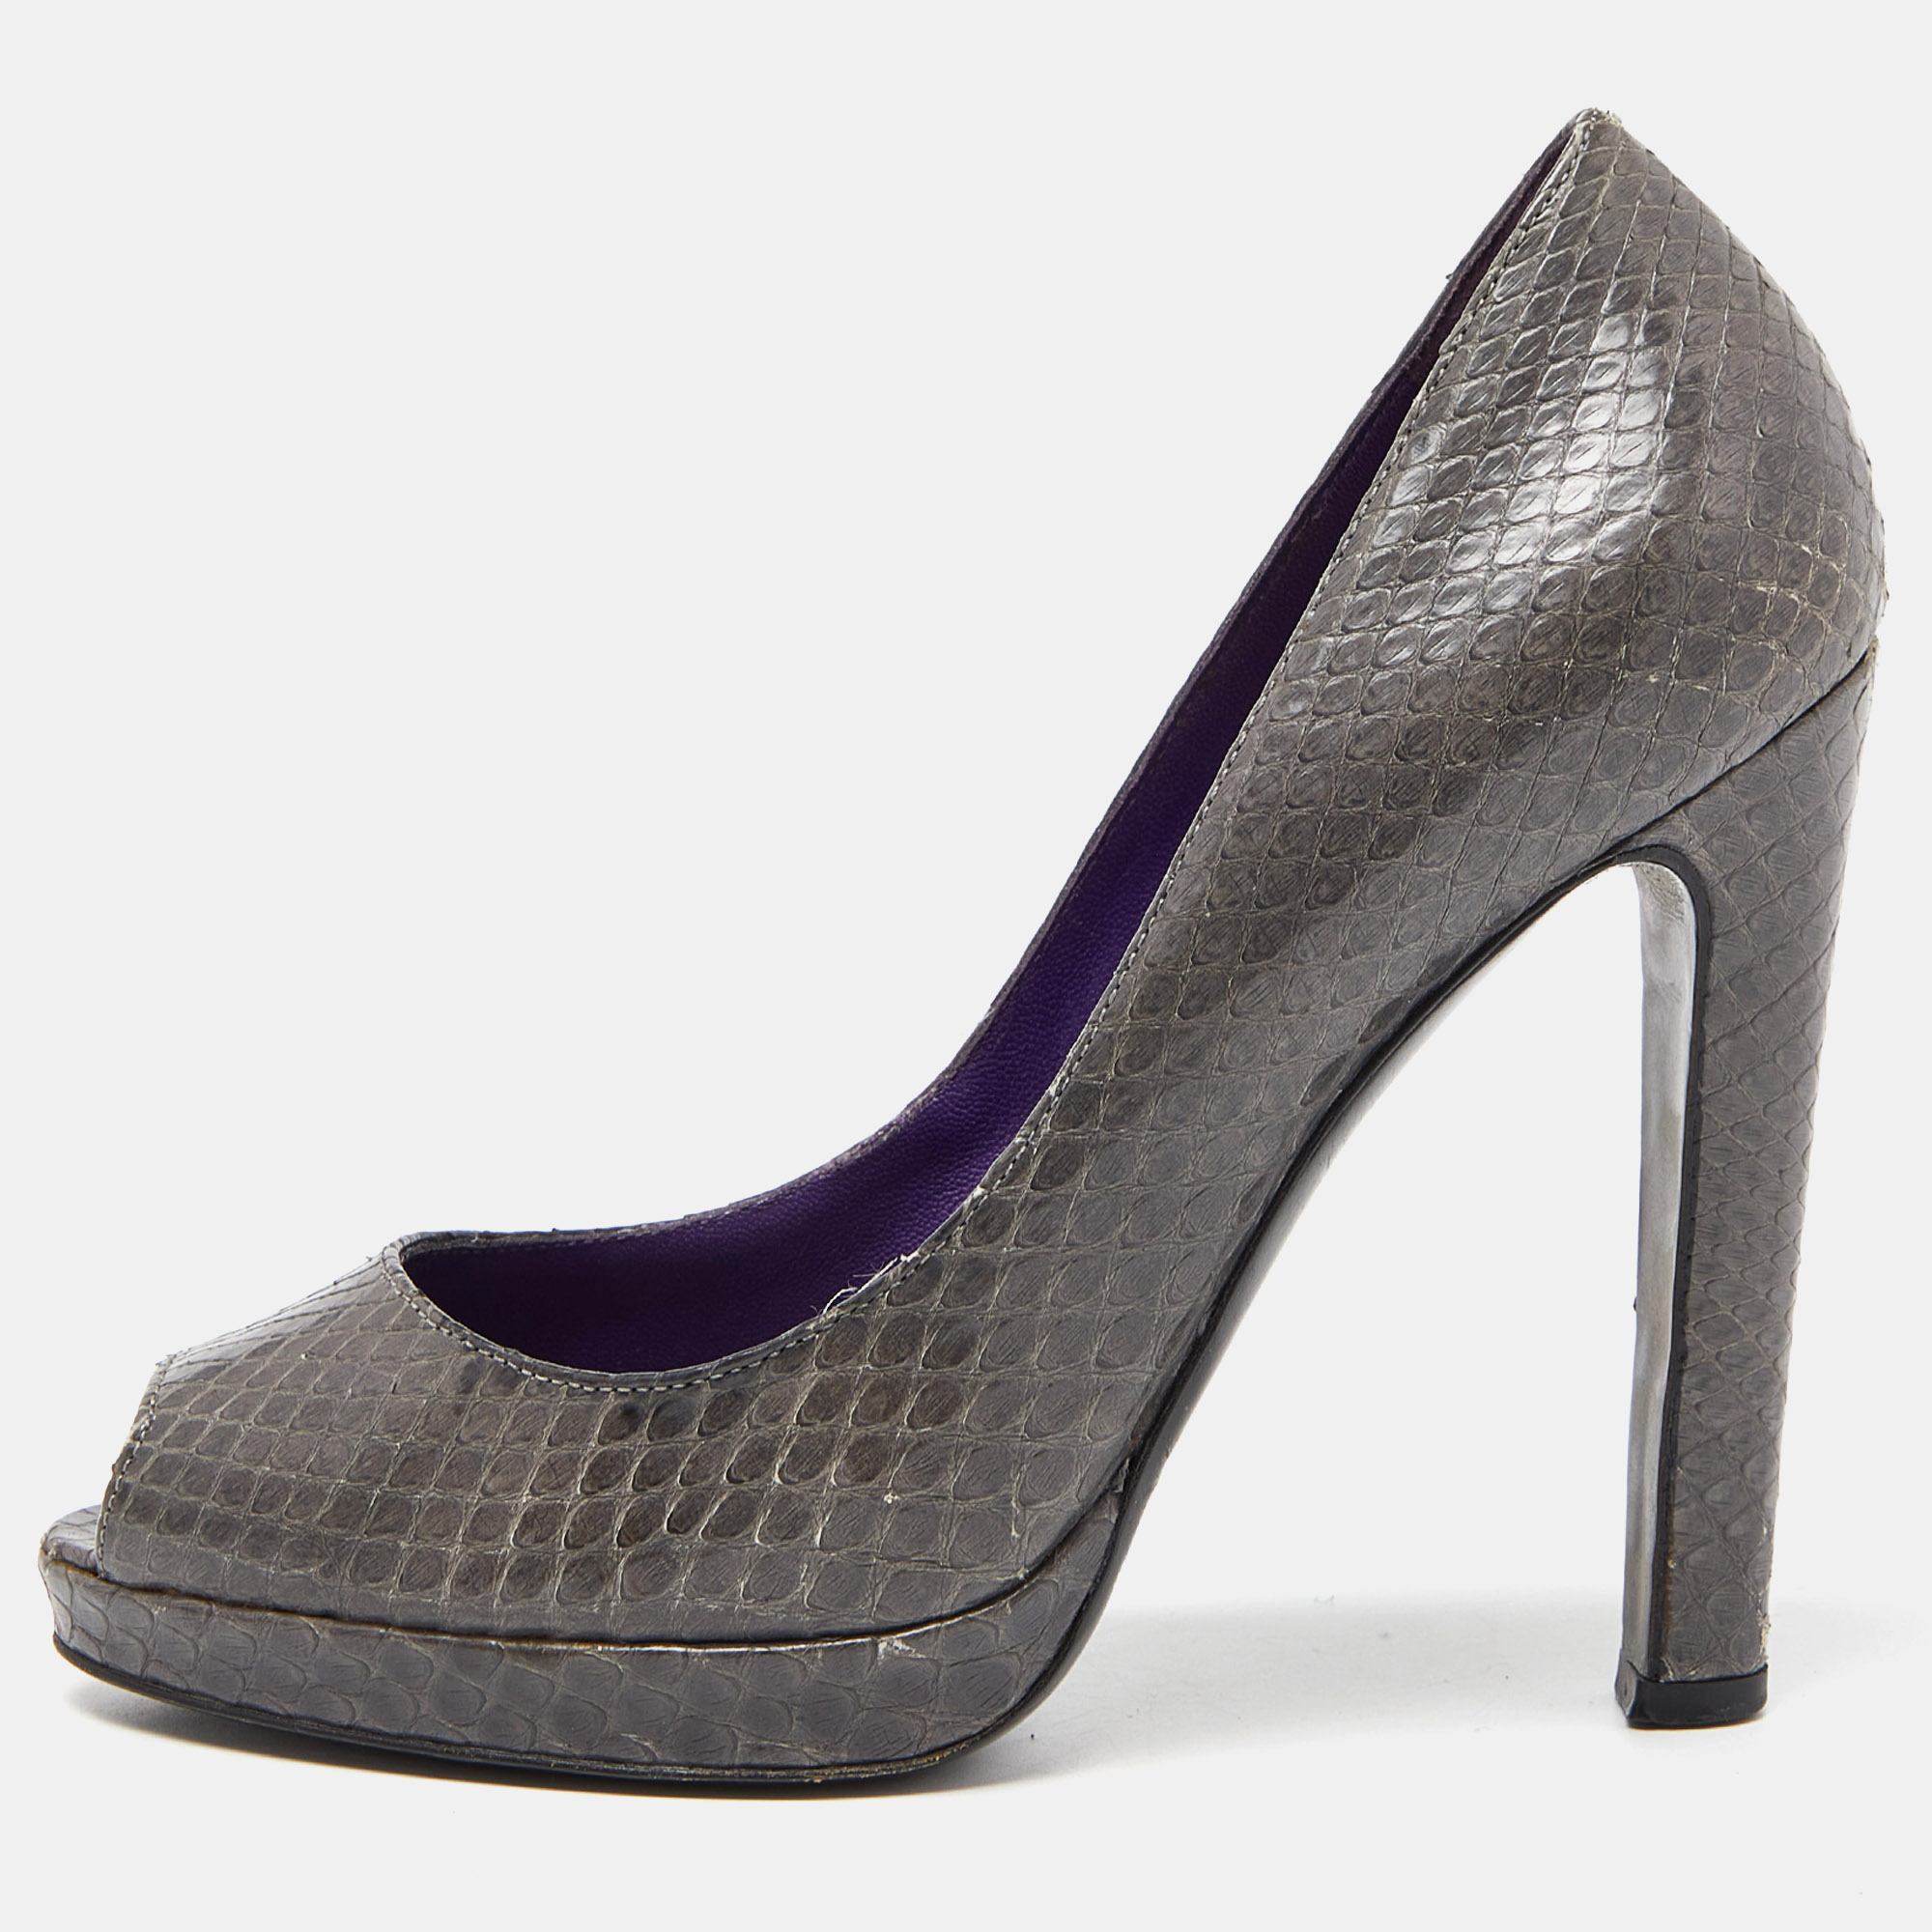 Sergio Rossi Grey Watersnake Leather Peep Toe Pumps Size 36.5